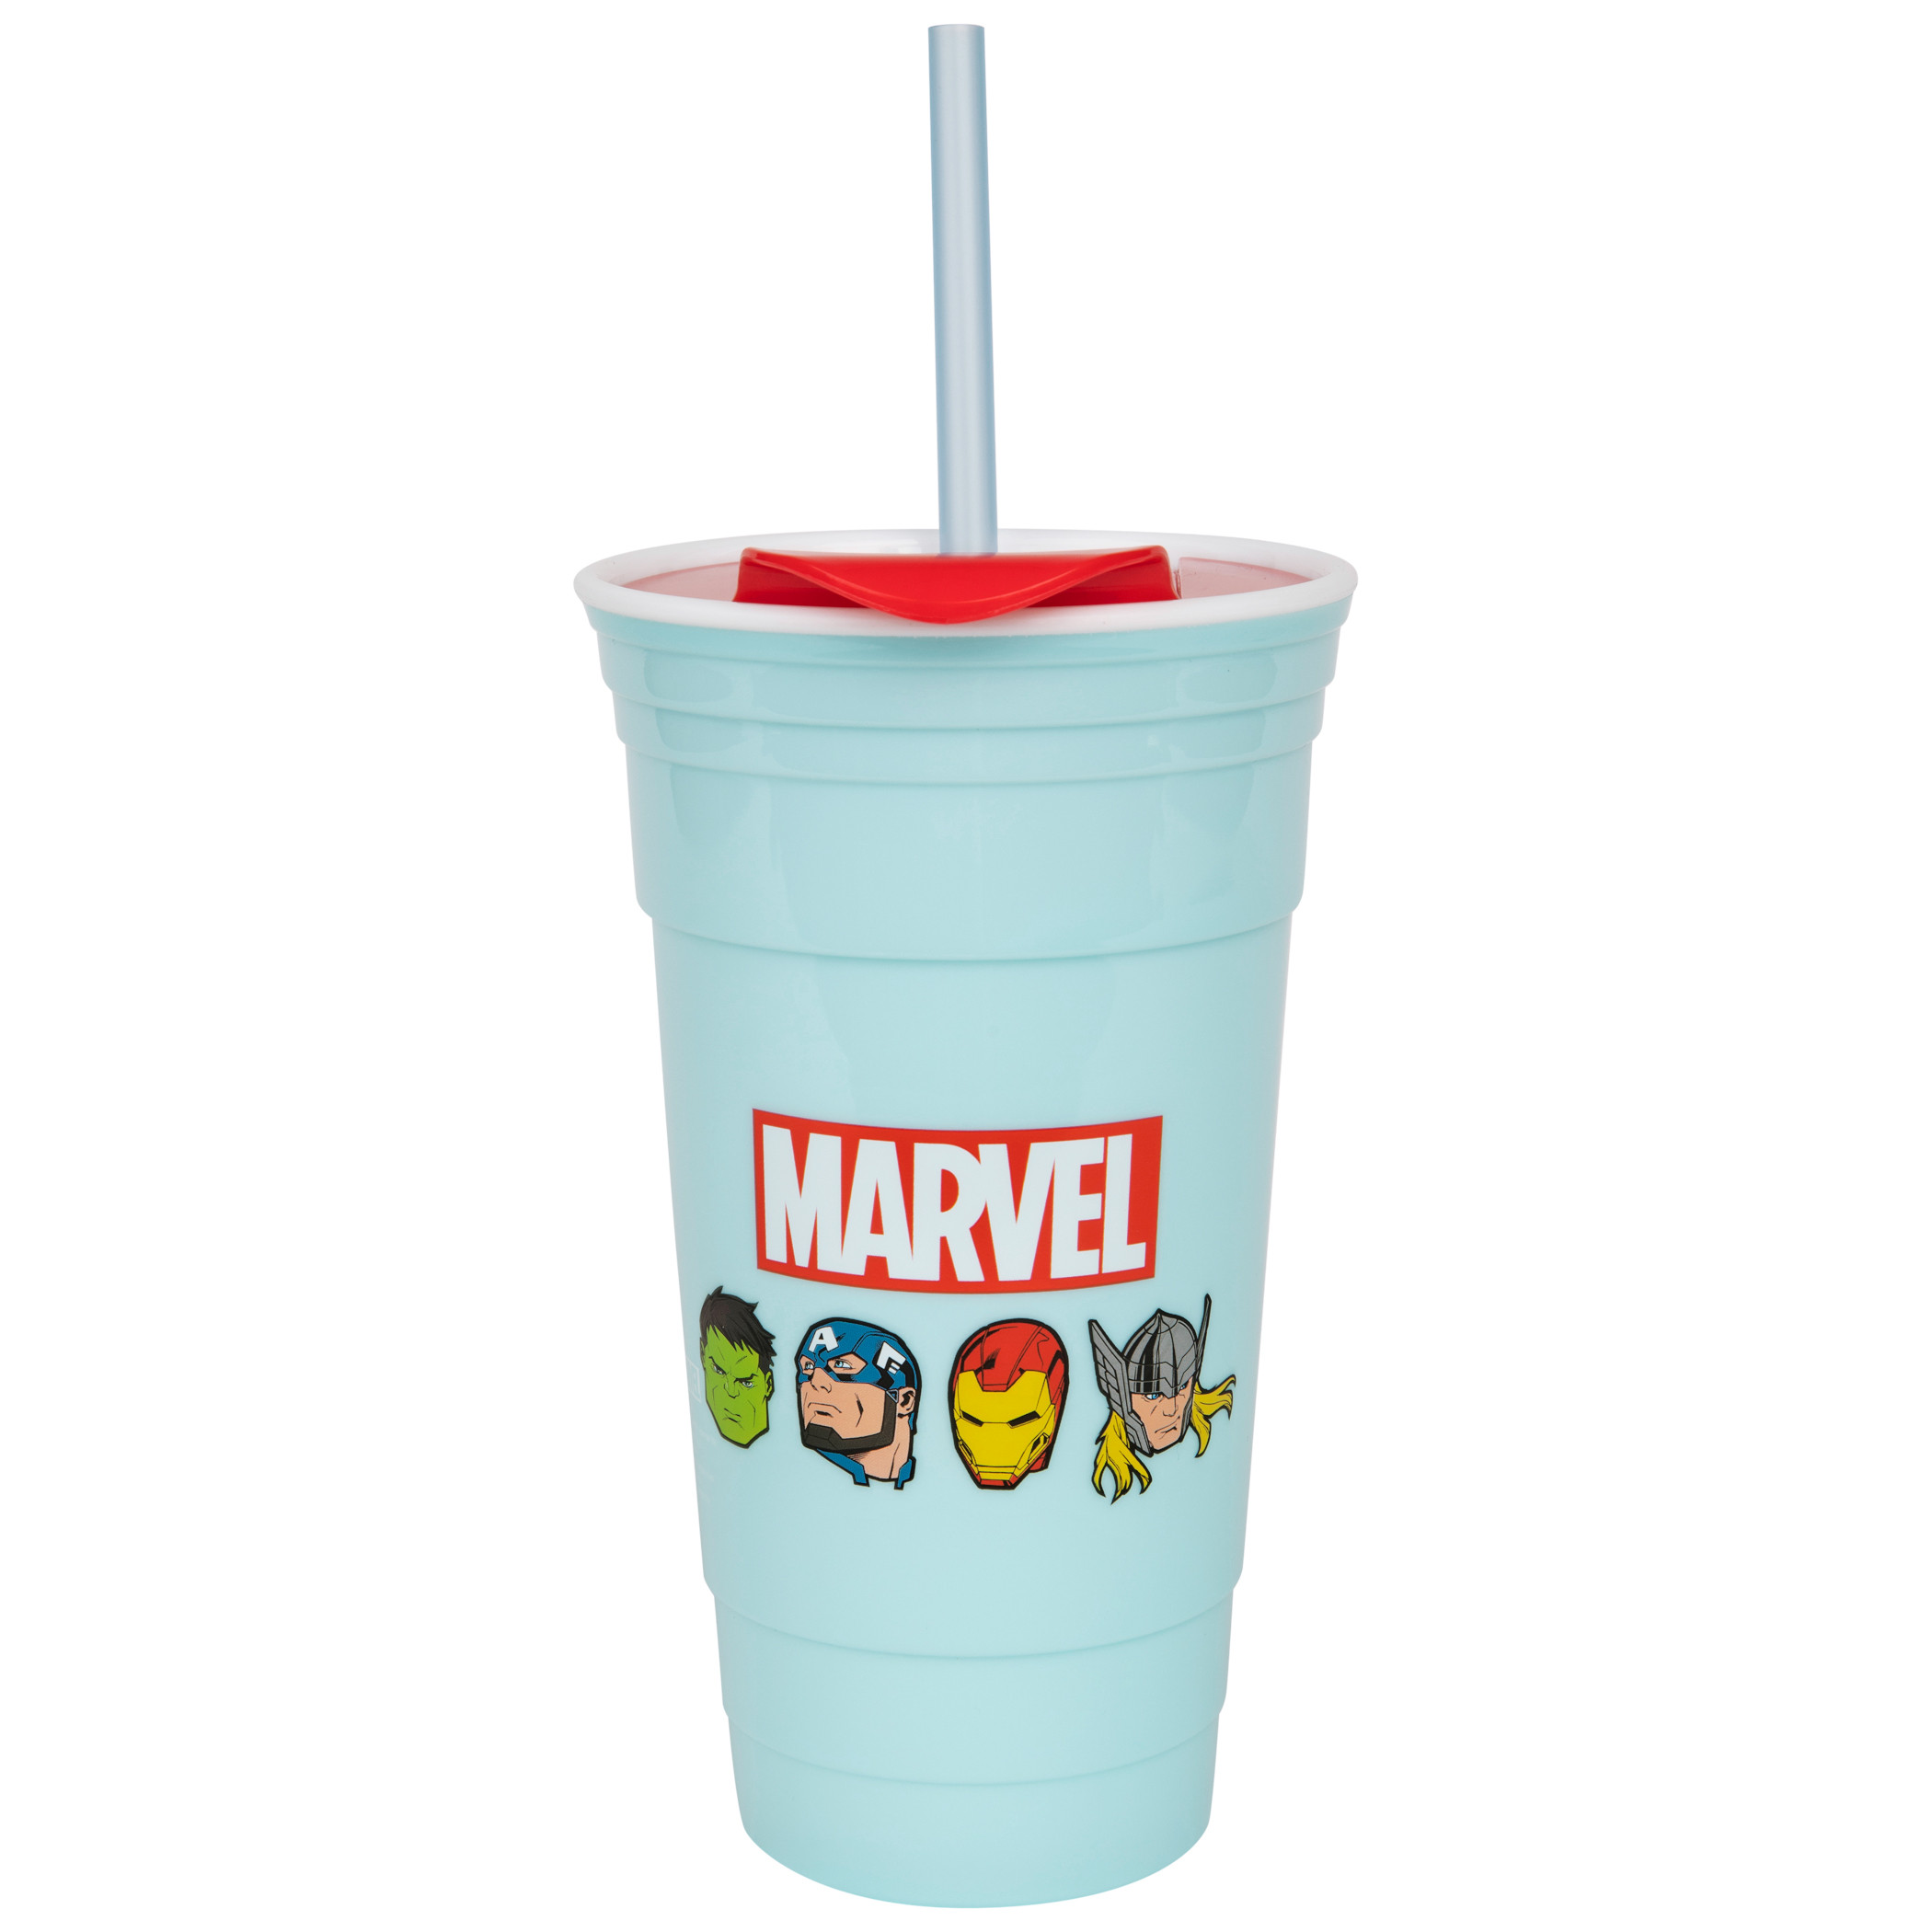 Marvel The Avengers Faces 32oz Plastic Party Cup with Lid and Straw